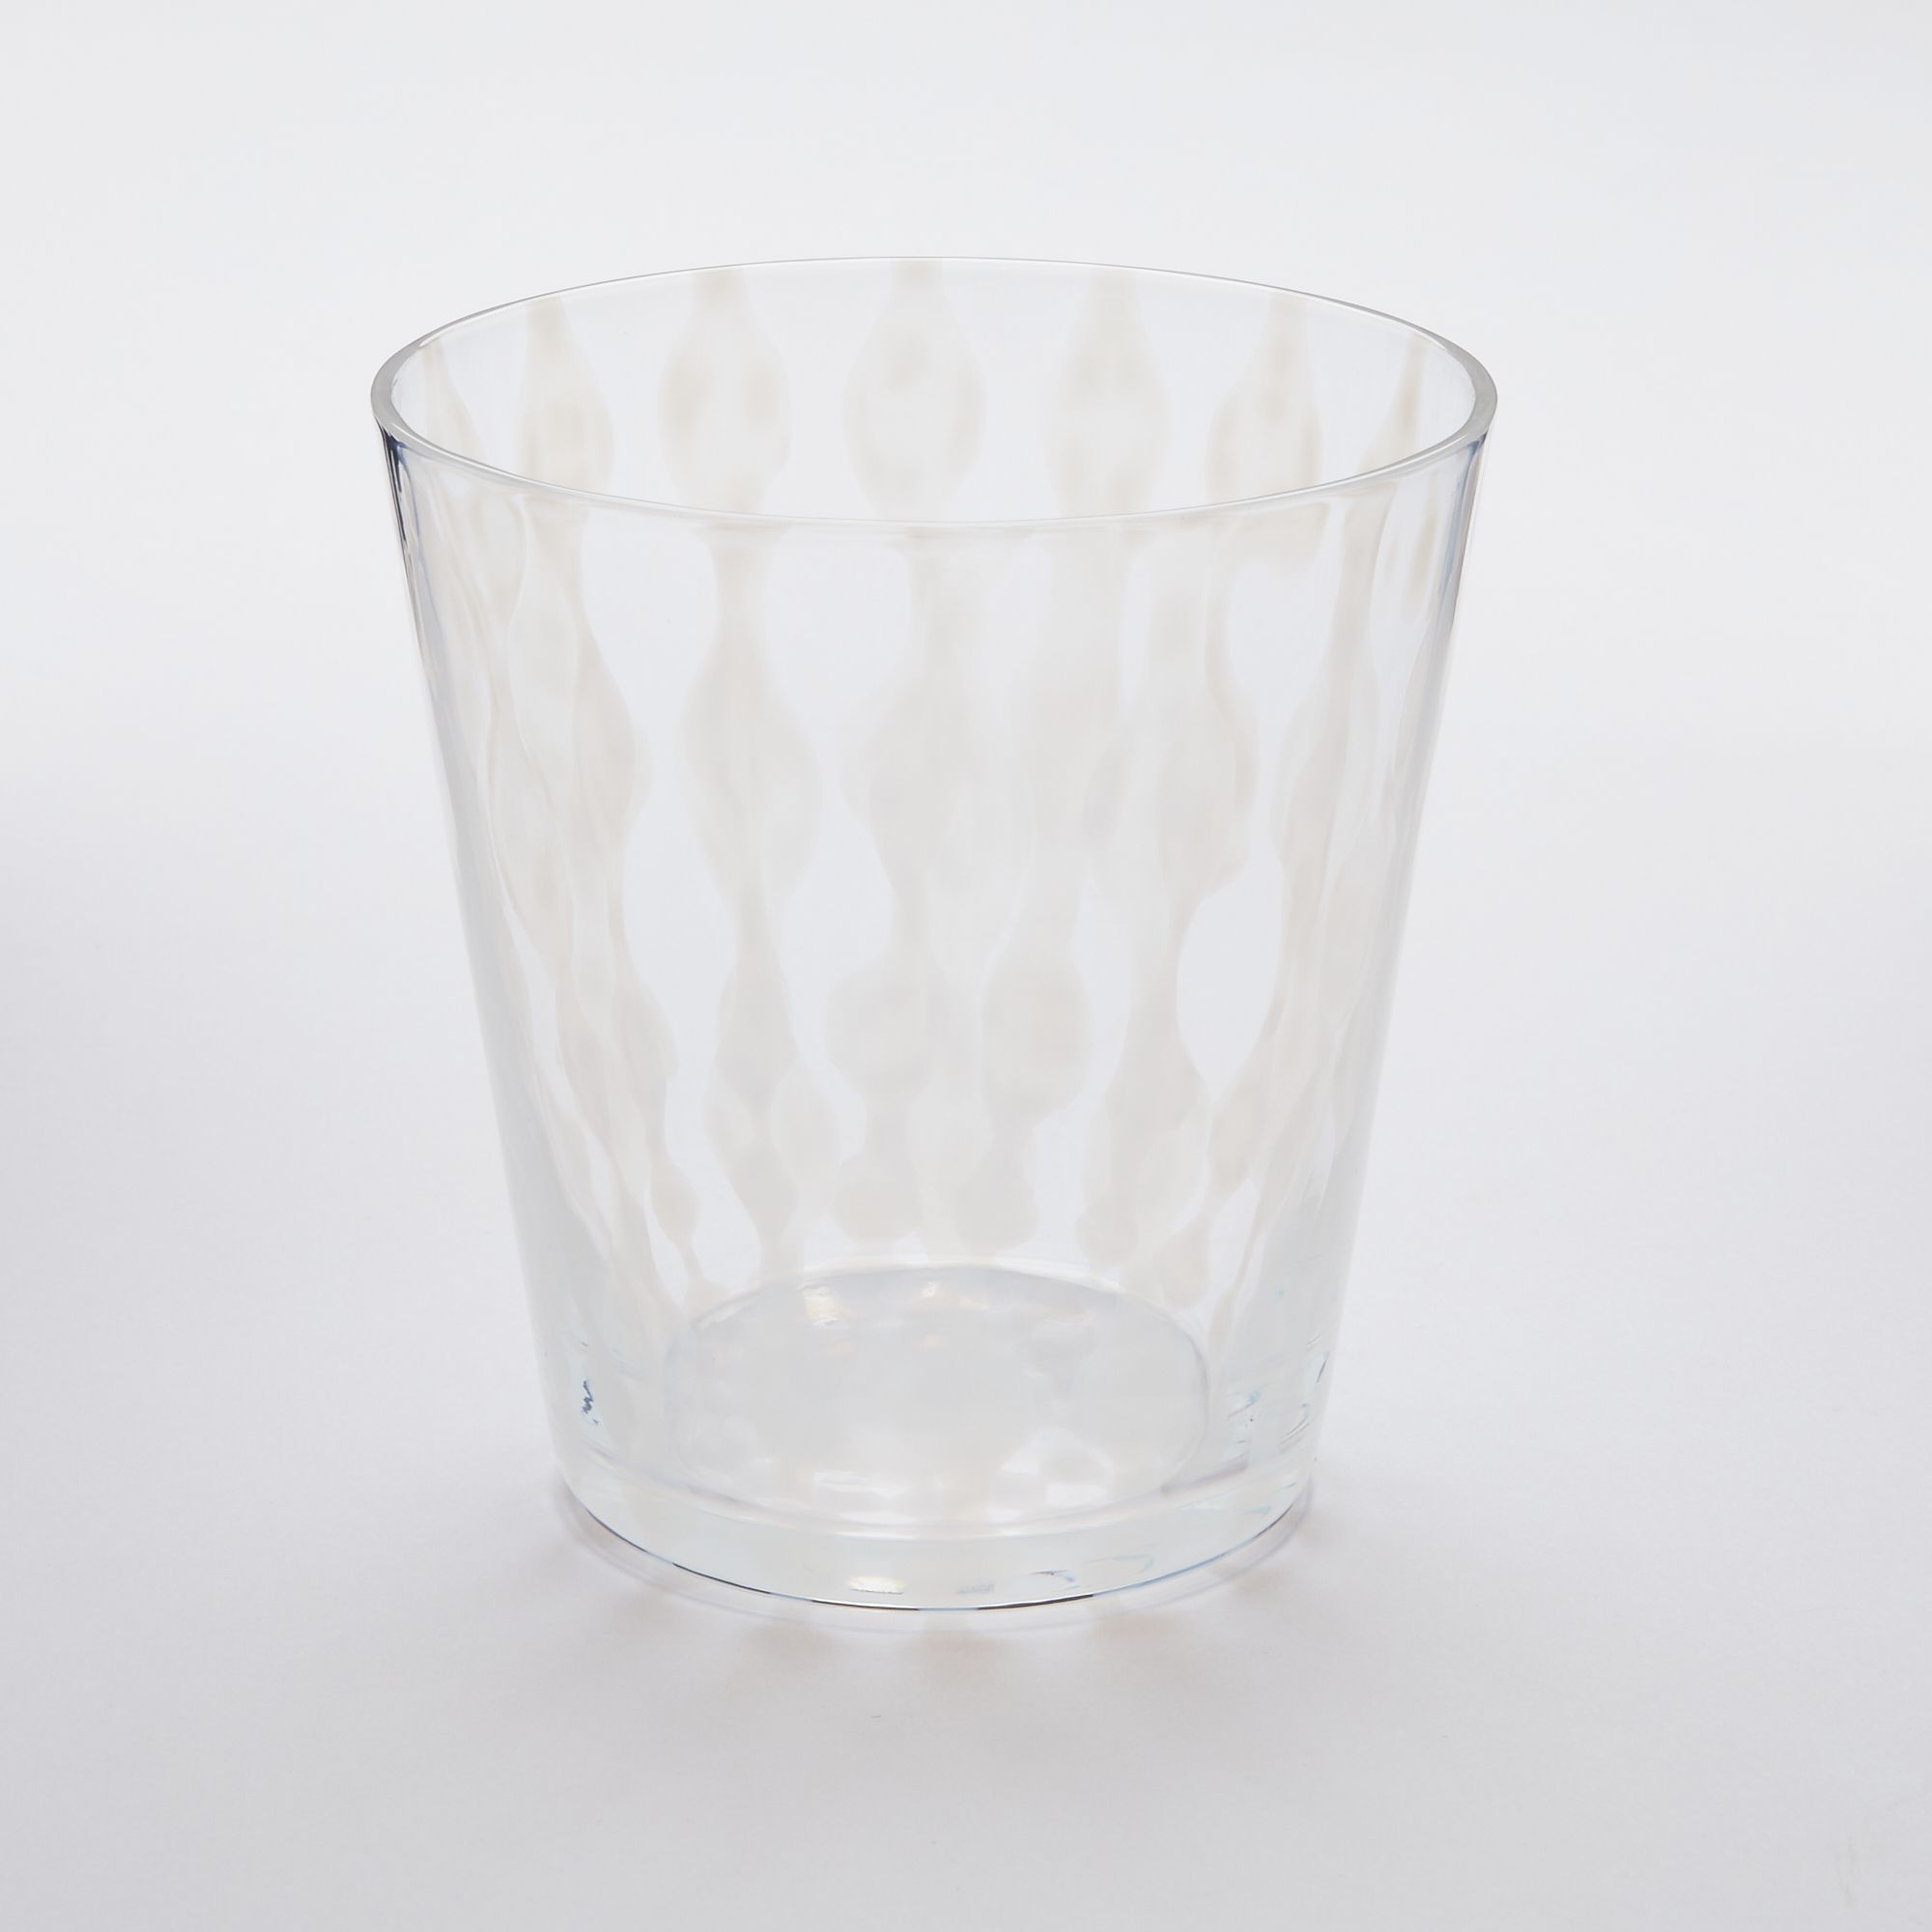 A short clear glass with a delicate vertical wave pattern